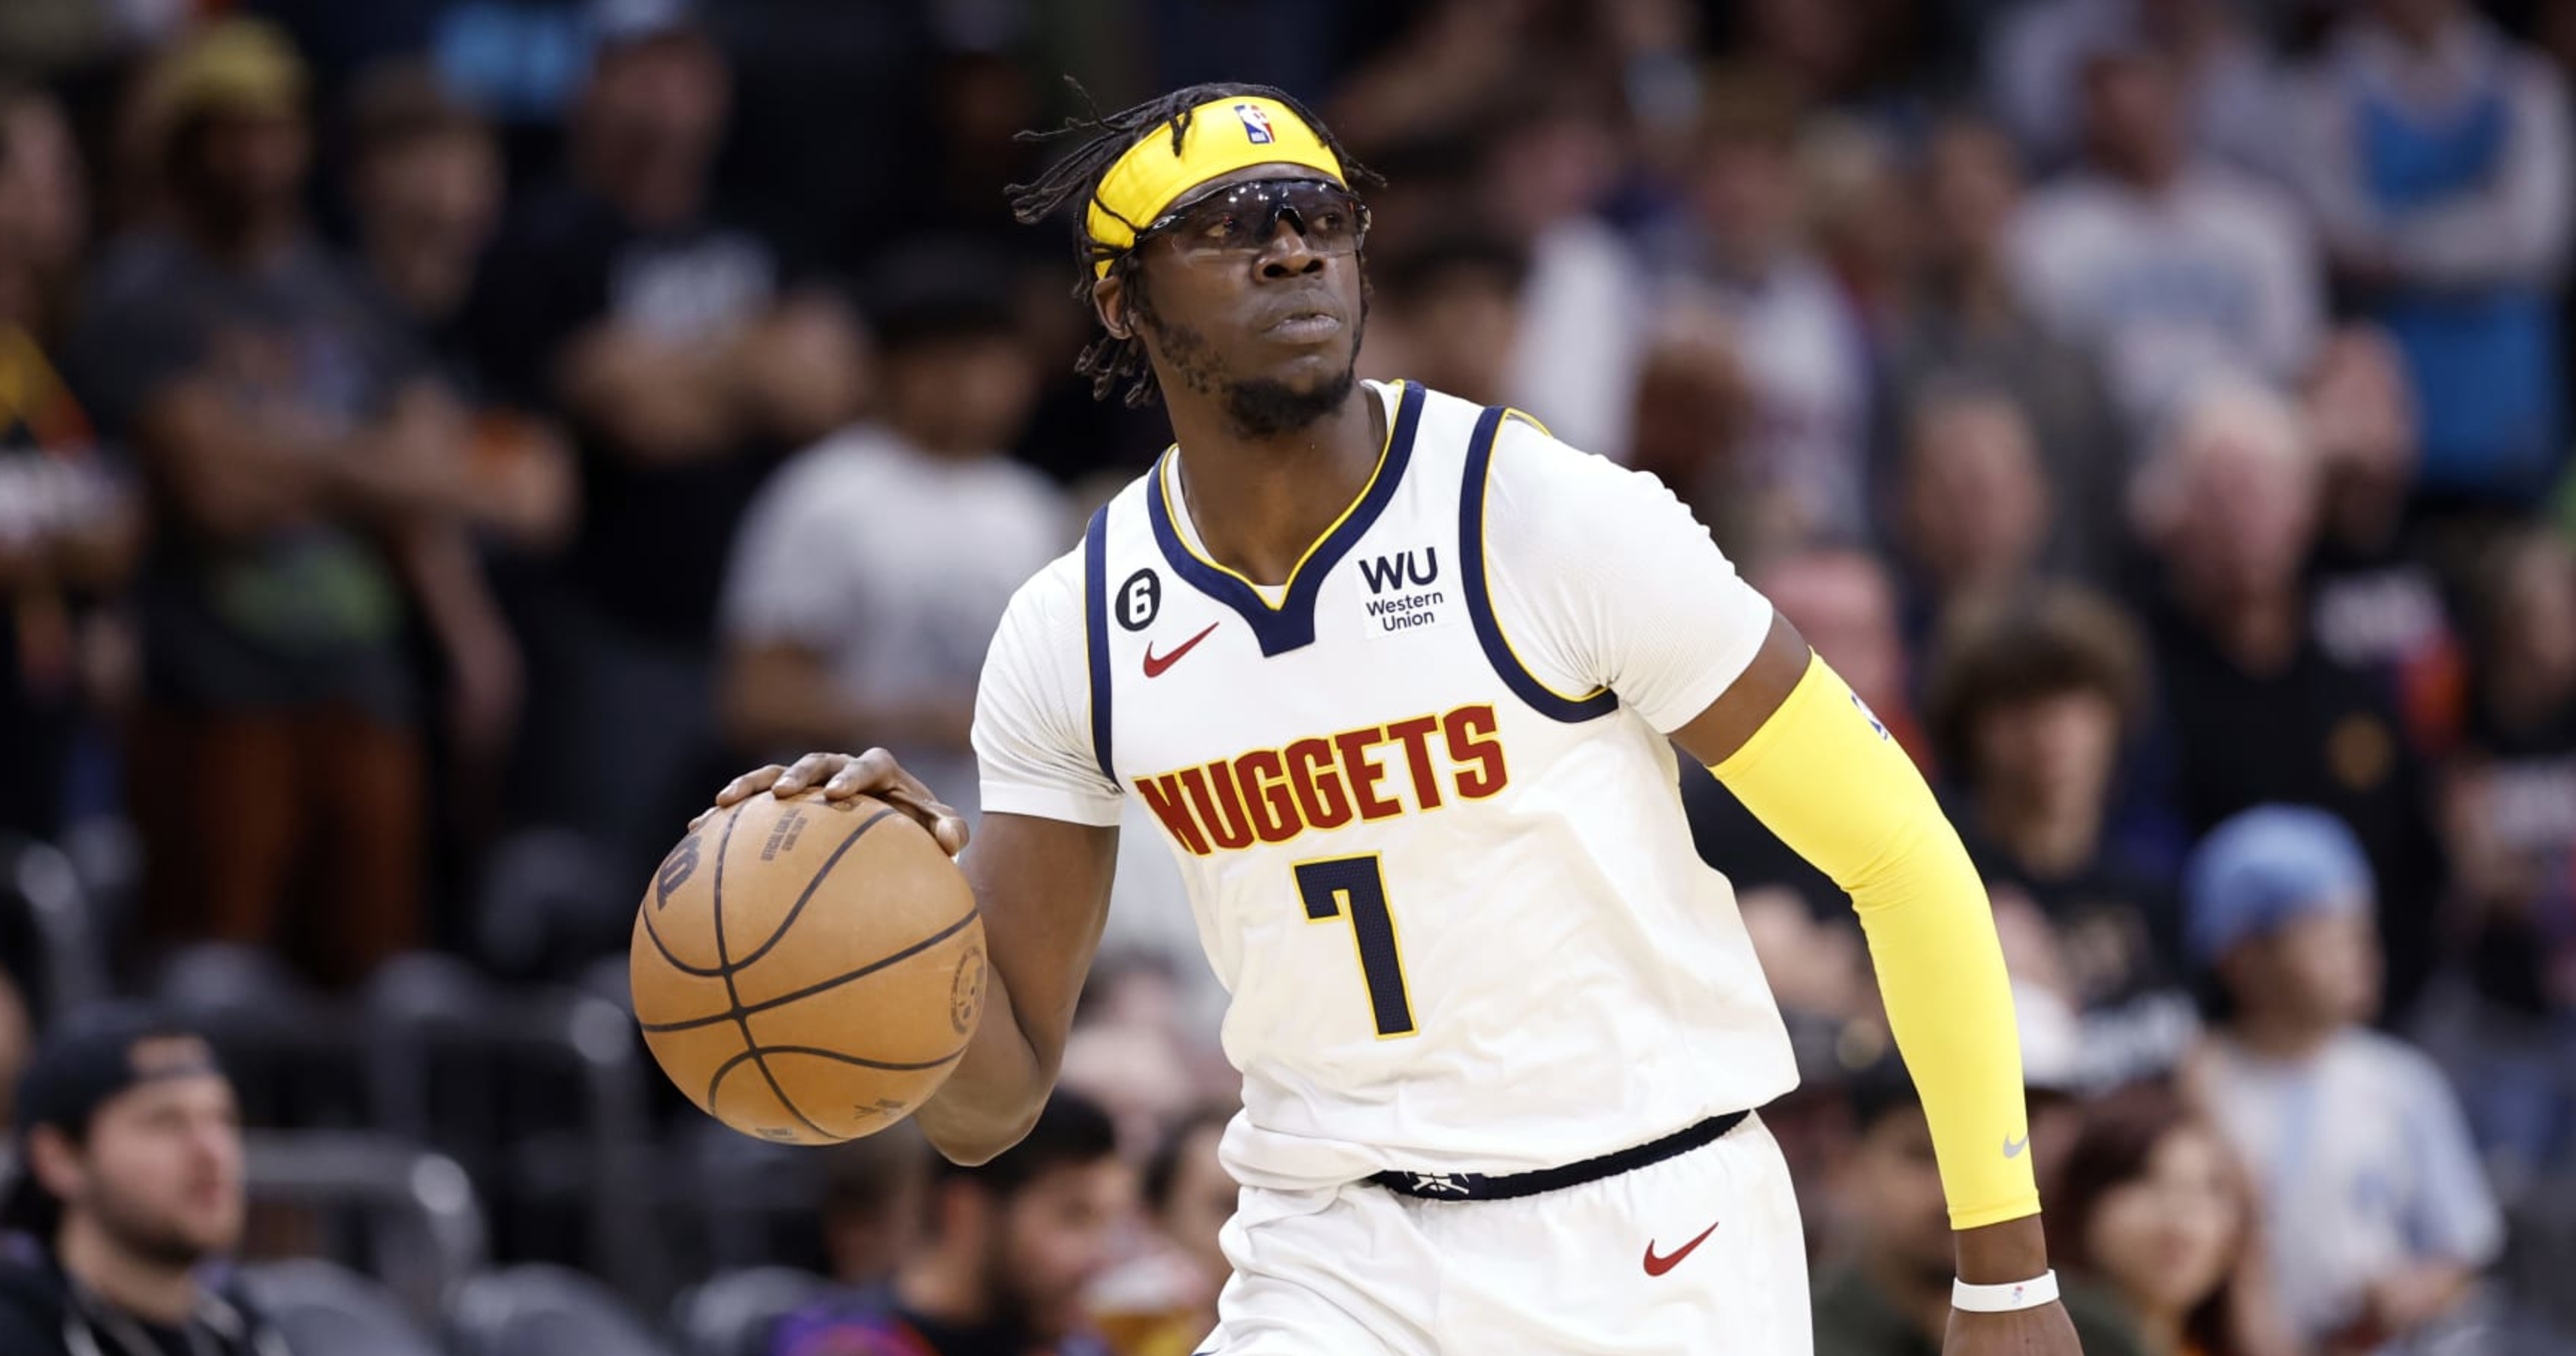 NBA Finals: Once ready to walk away from basketball, Reggie Jackson is now  1 win away from title with Nuggets